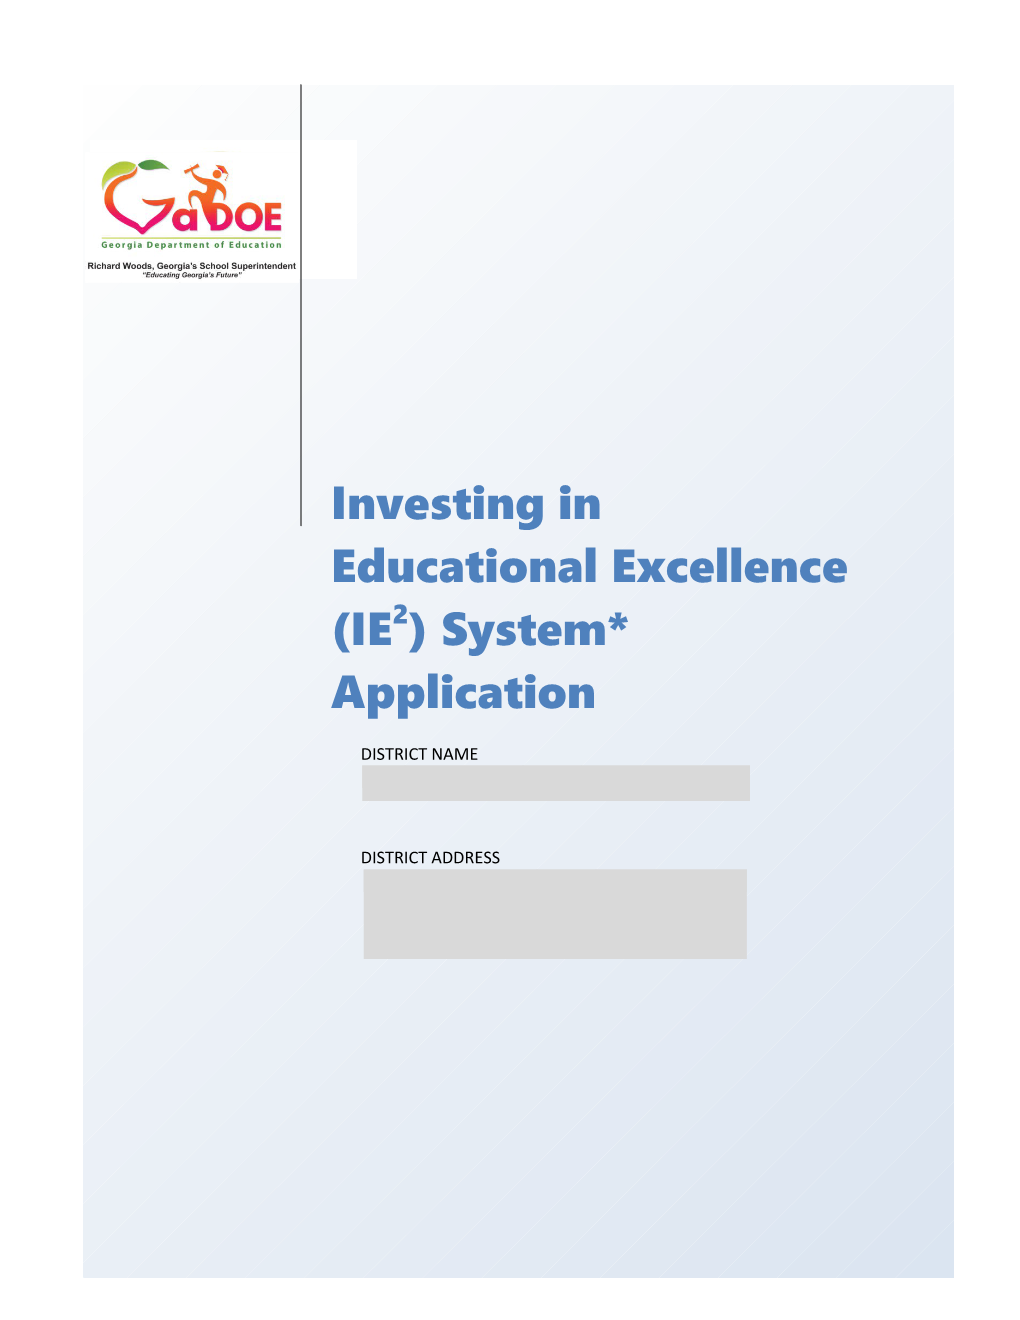 Investing in Educational Excellence (IE2) System* Application